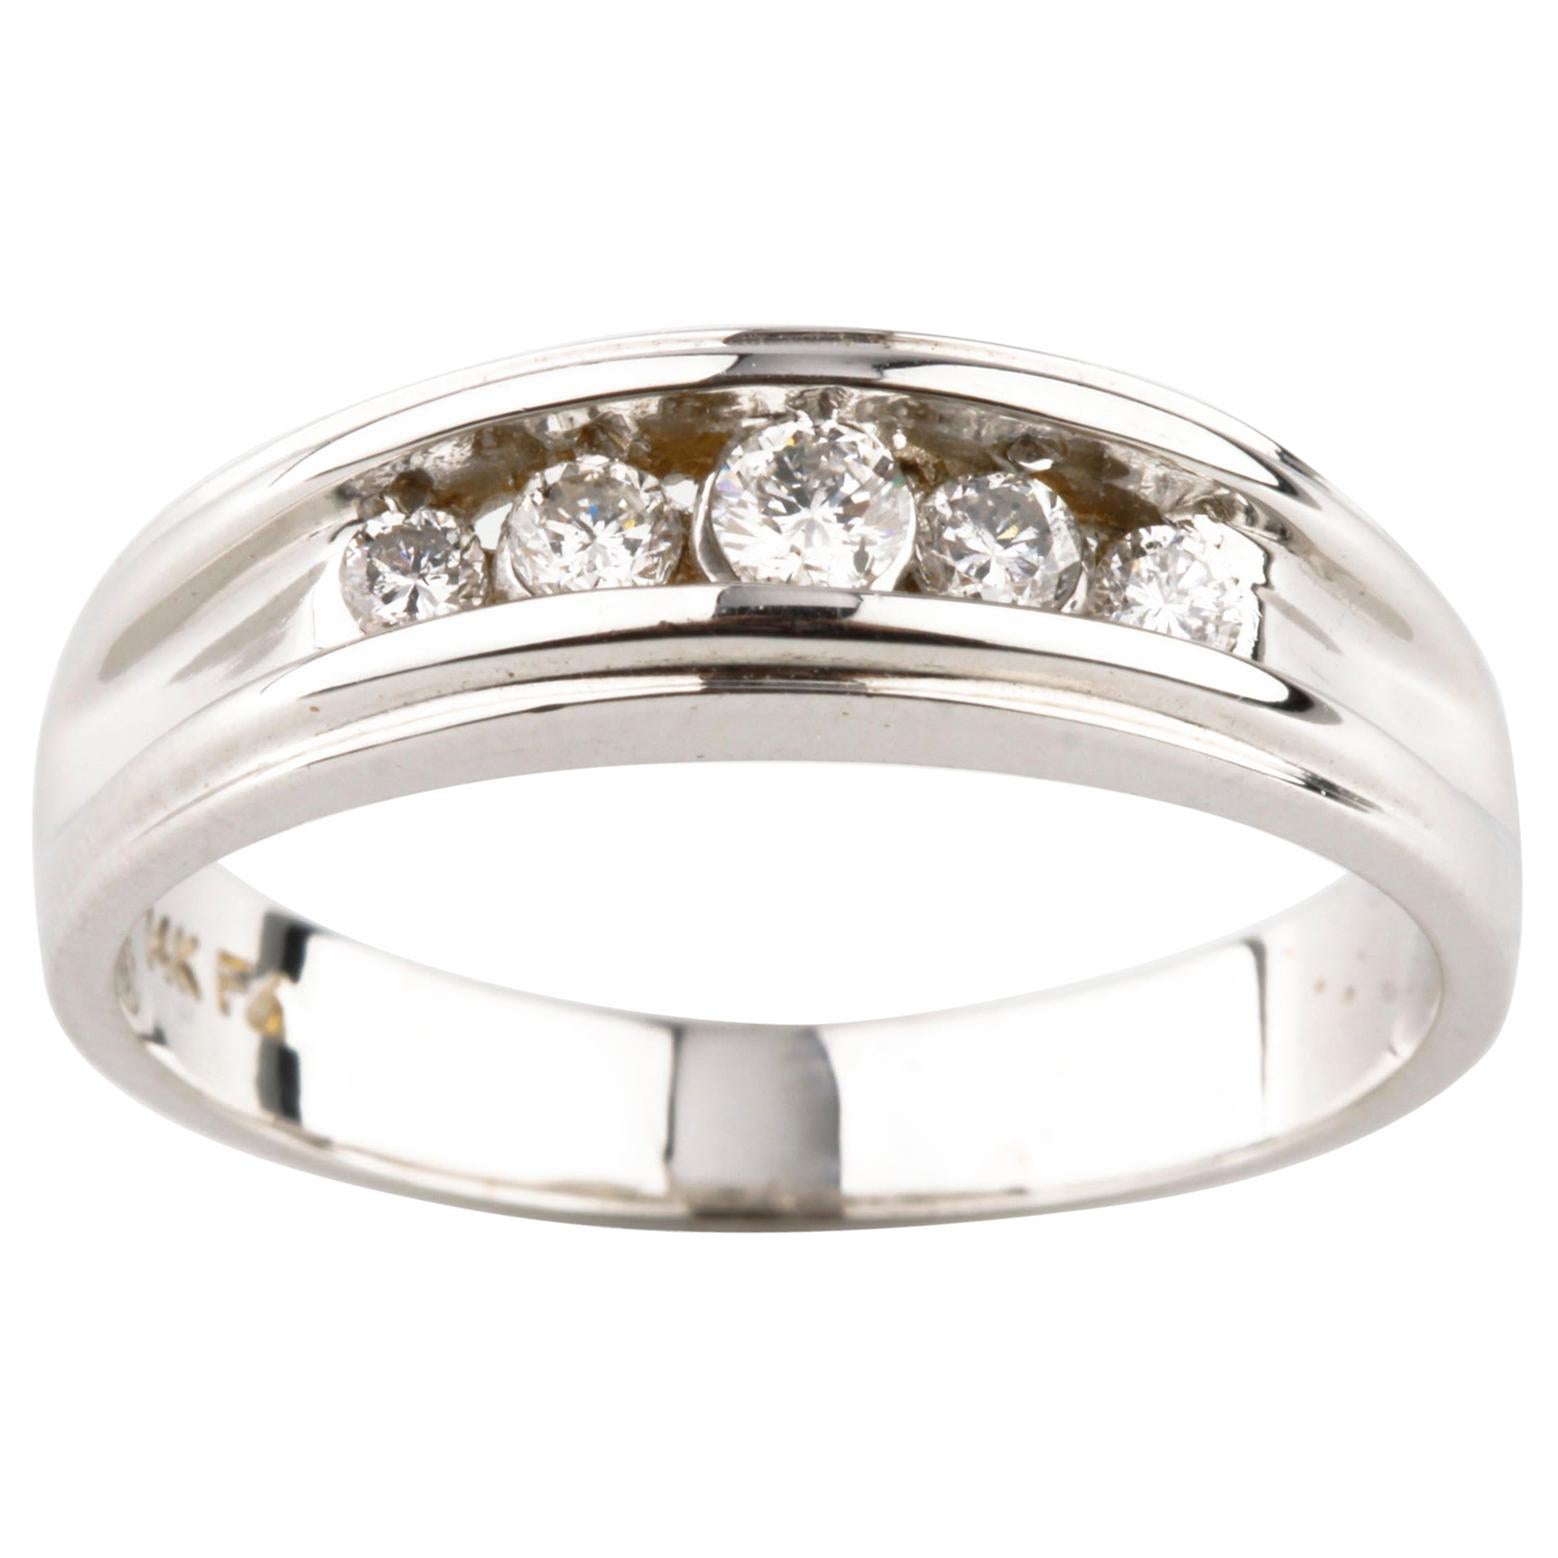 0.30 Carat Five-Stone Round Diamond Engagement Ring in White Gold